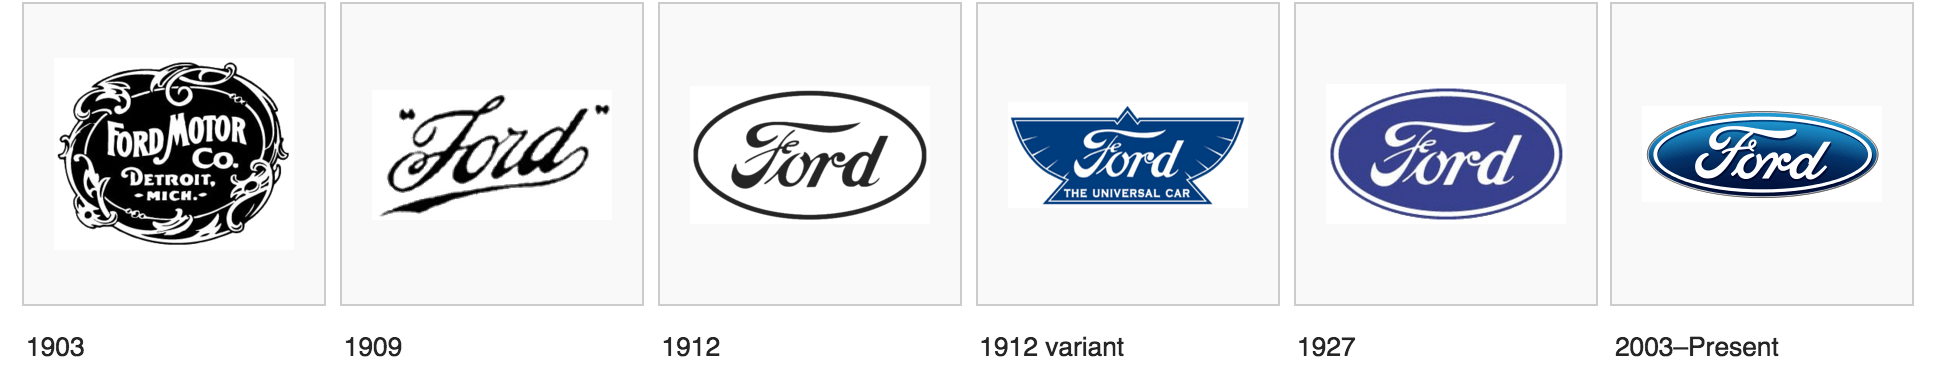 1912 Ford Logo - FORD LOGOS: A History | Lamarque Ford - Ronnie Logues